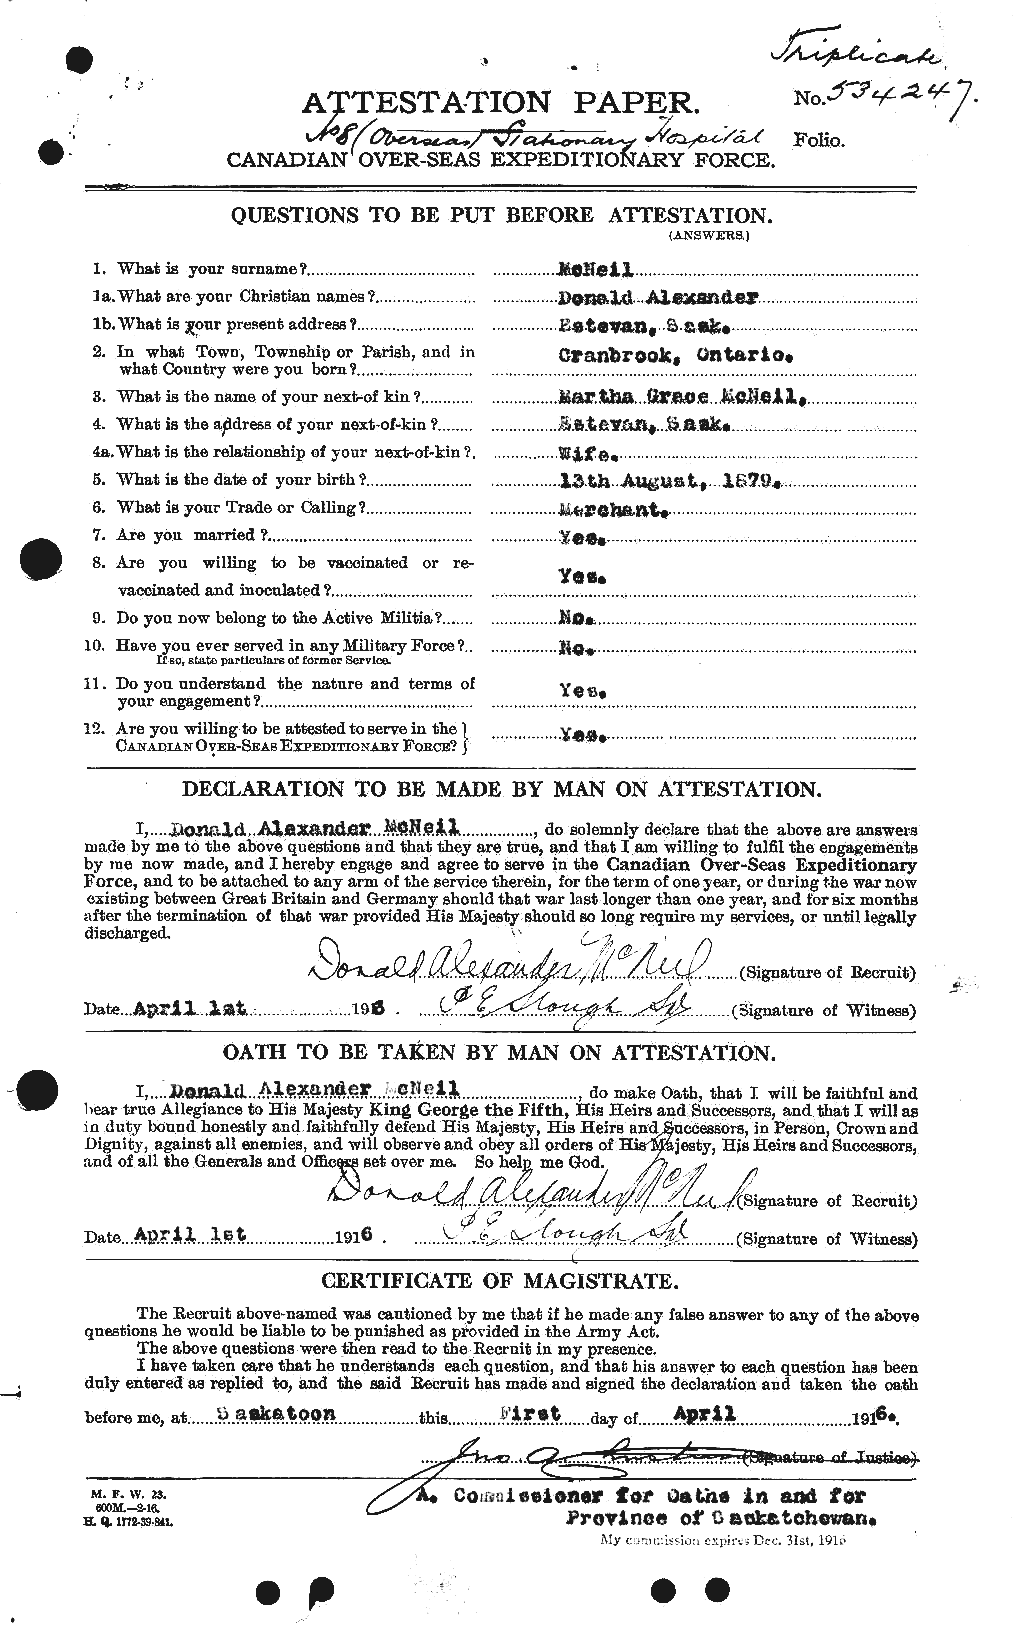 Personnel Records of the First World War - CEF 541790a